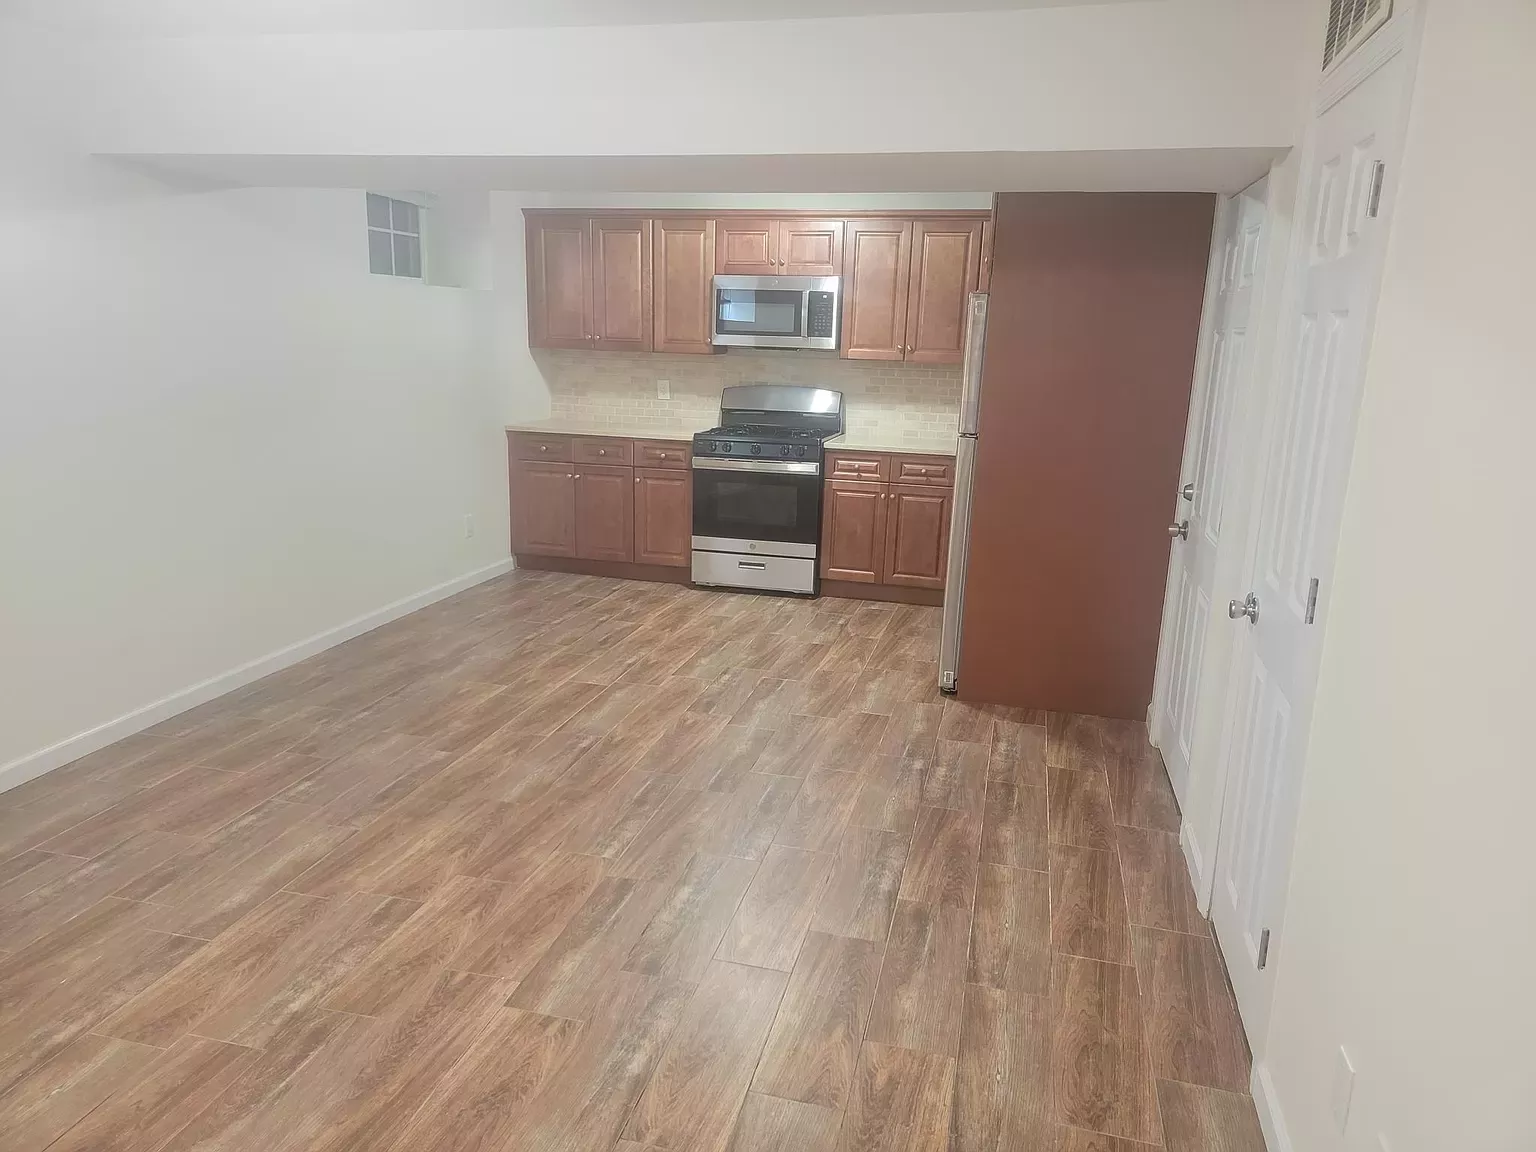 Apartment for Rent in Woodrow, NY Staten Island